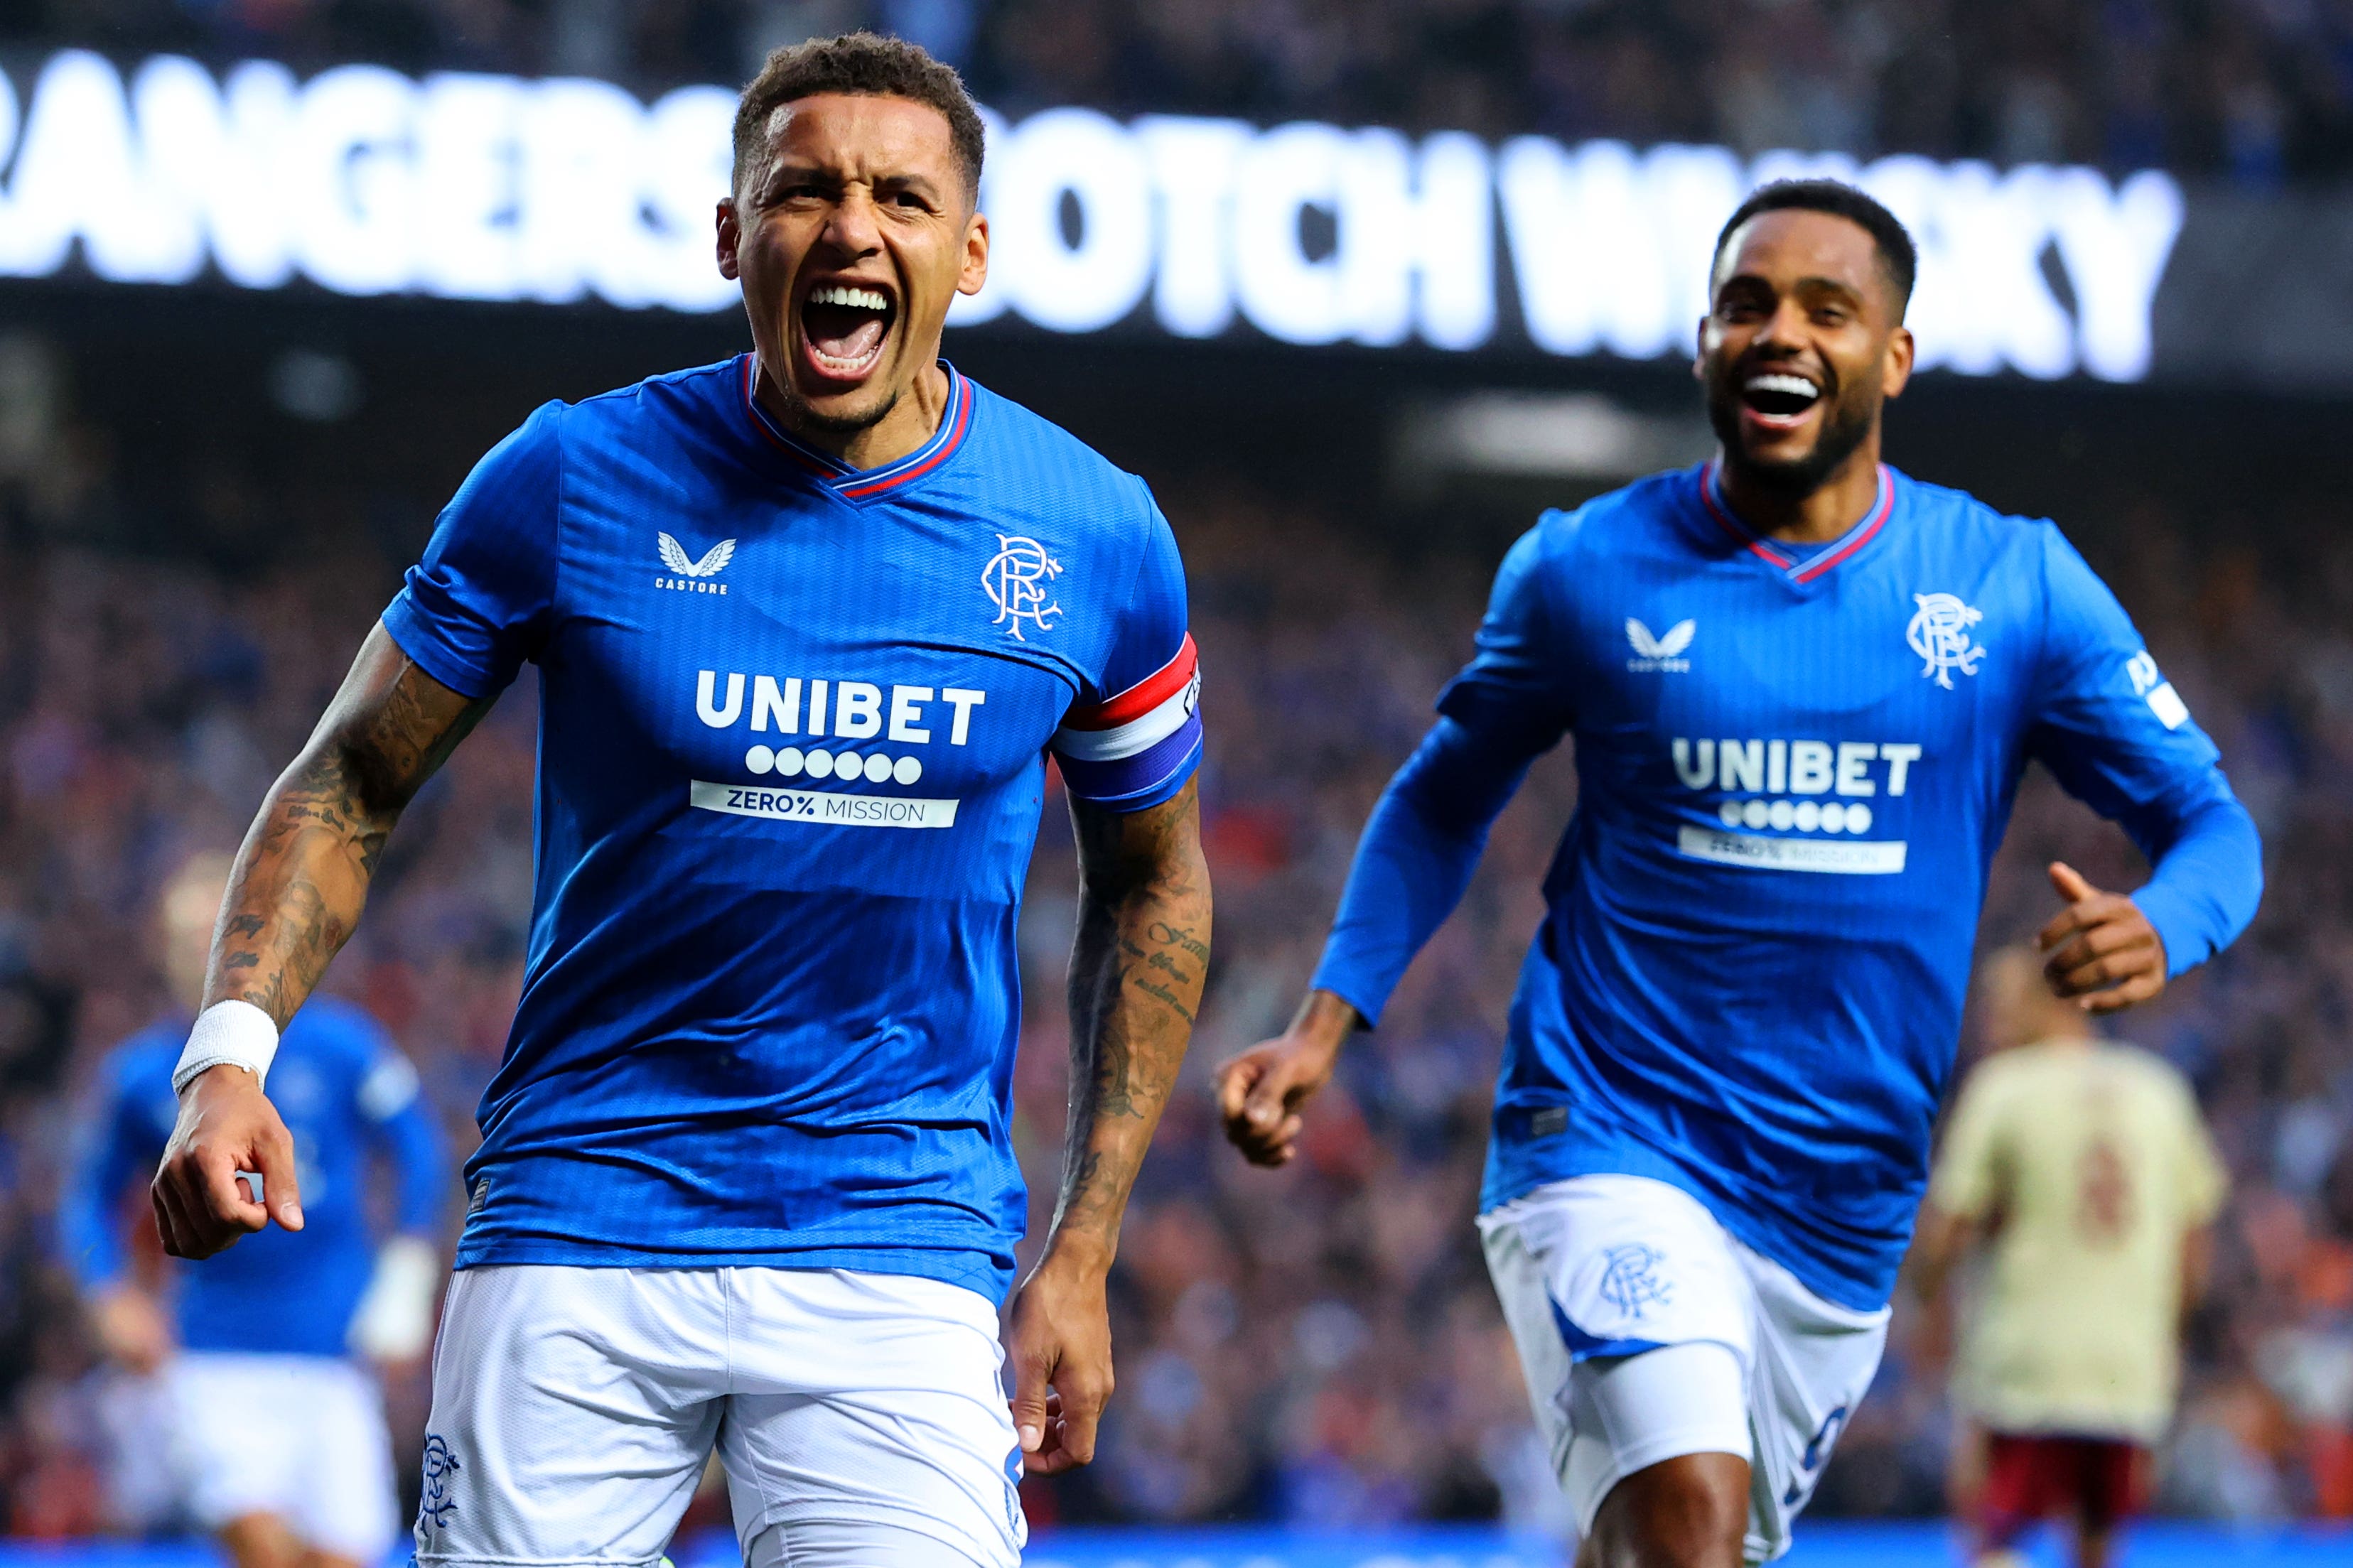 Wasteful' Rangers left with work to do after narrow win over Servette